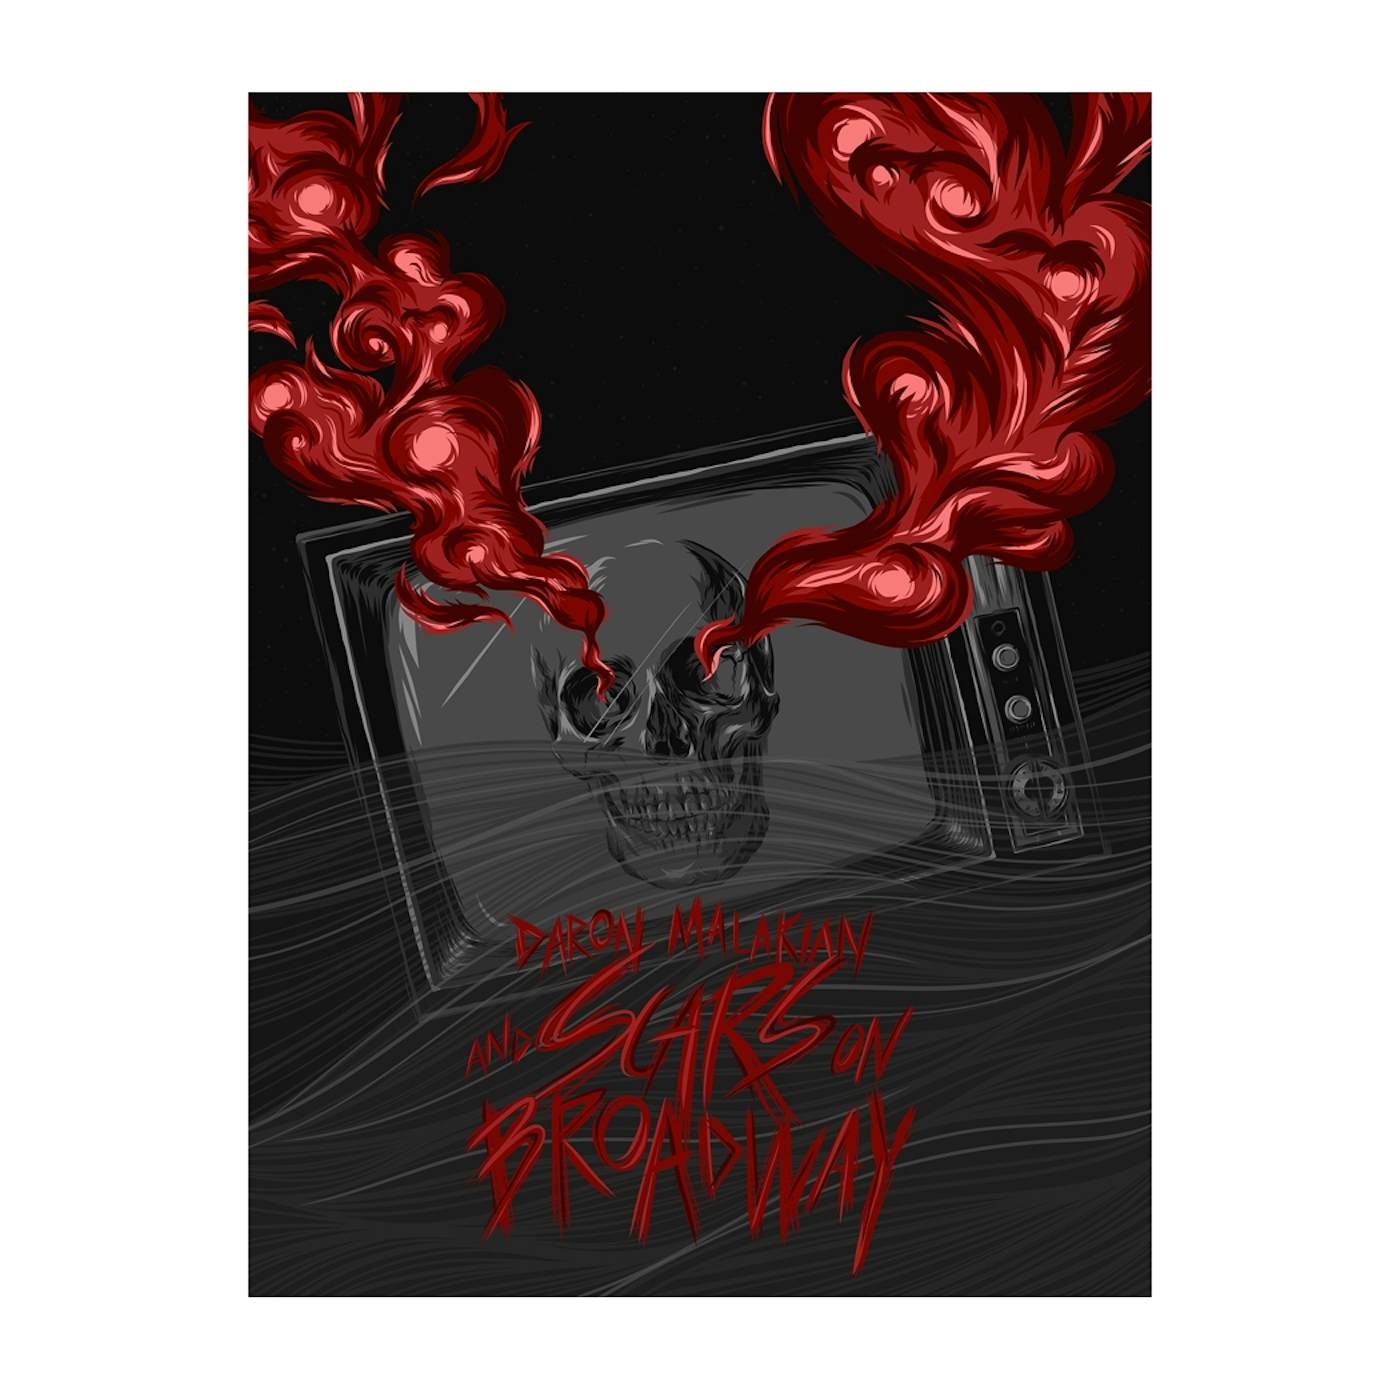 Scars On Broadway Skull Television Poster